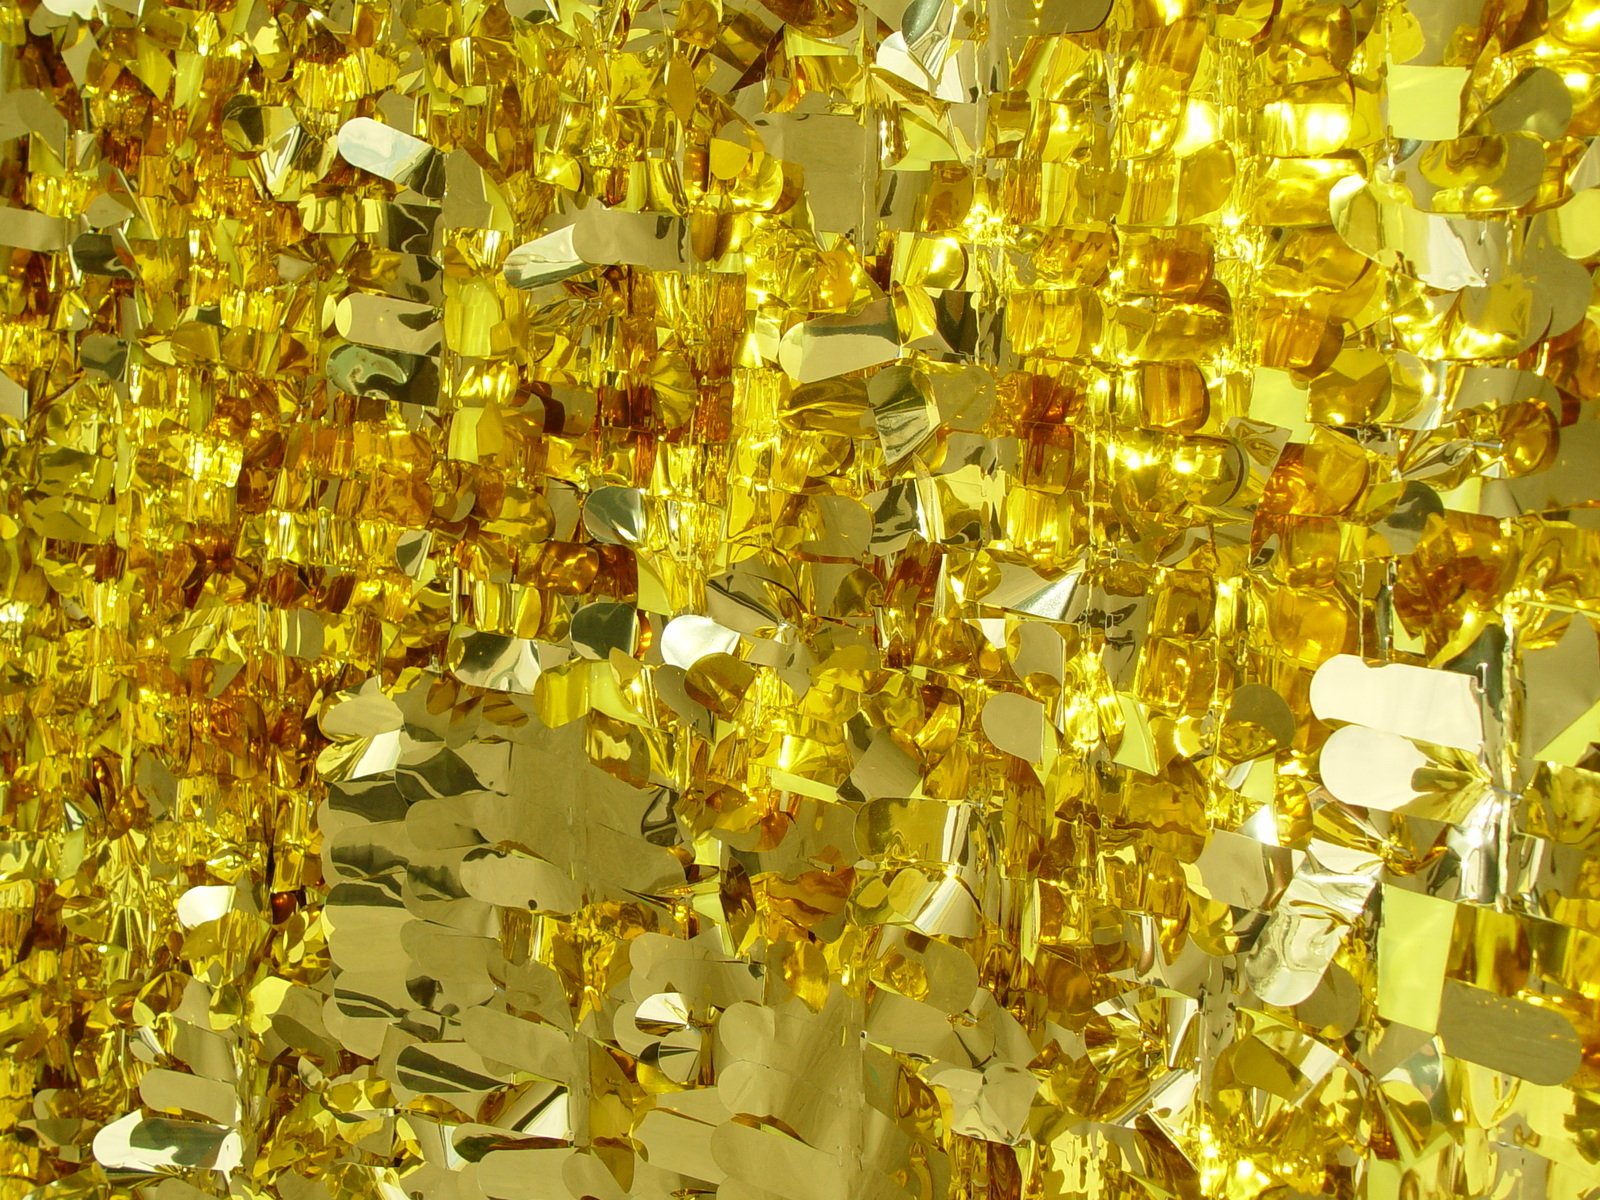 a yellow wall full of shiny glass pieces